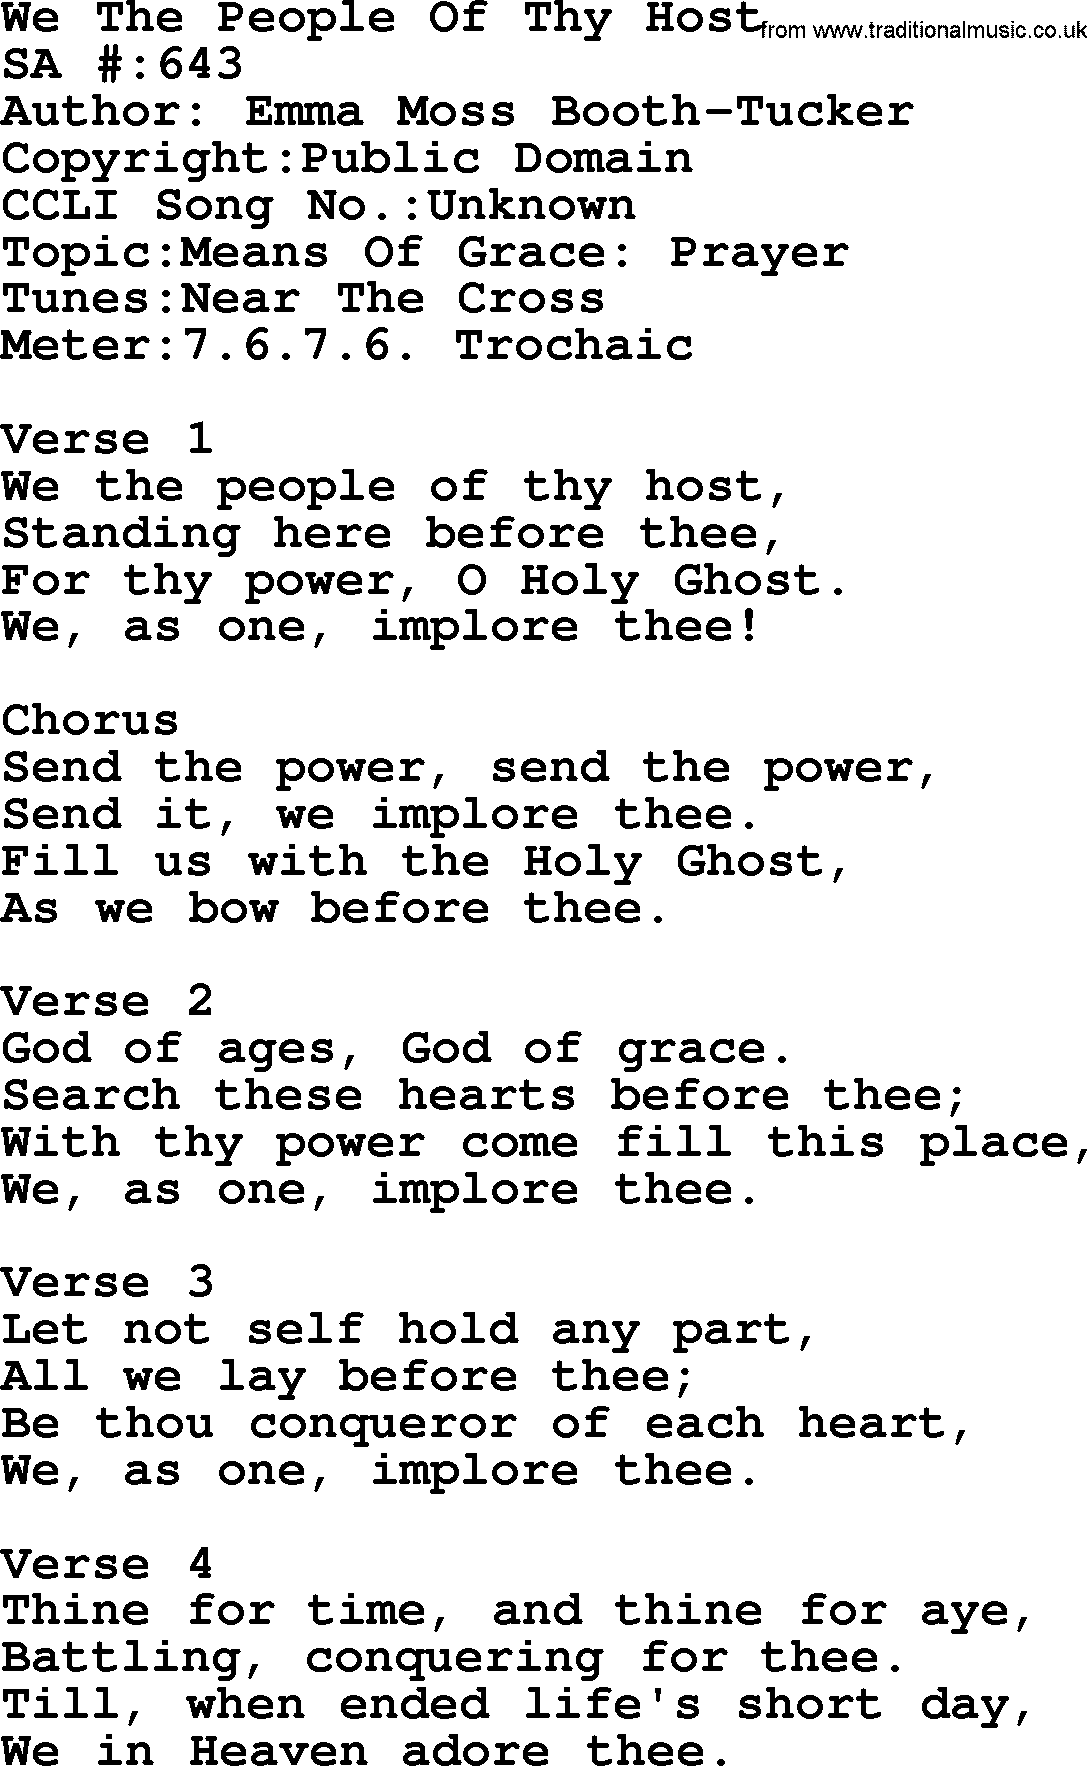 Salvation Army Hymnal, title: We The People Of Thy Host, with lyrics and PDF,